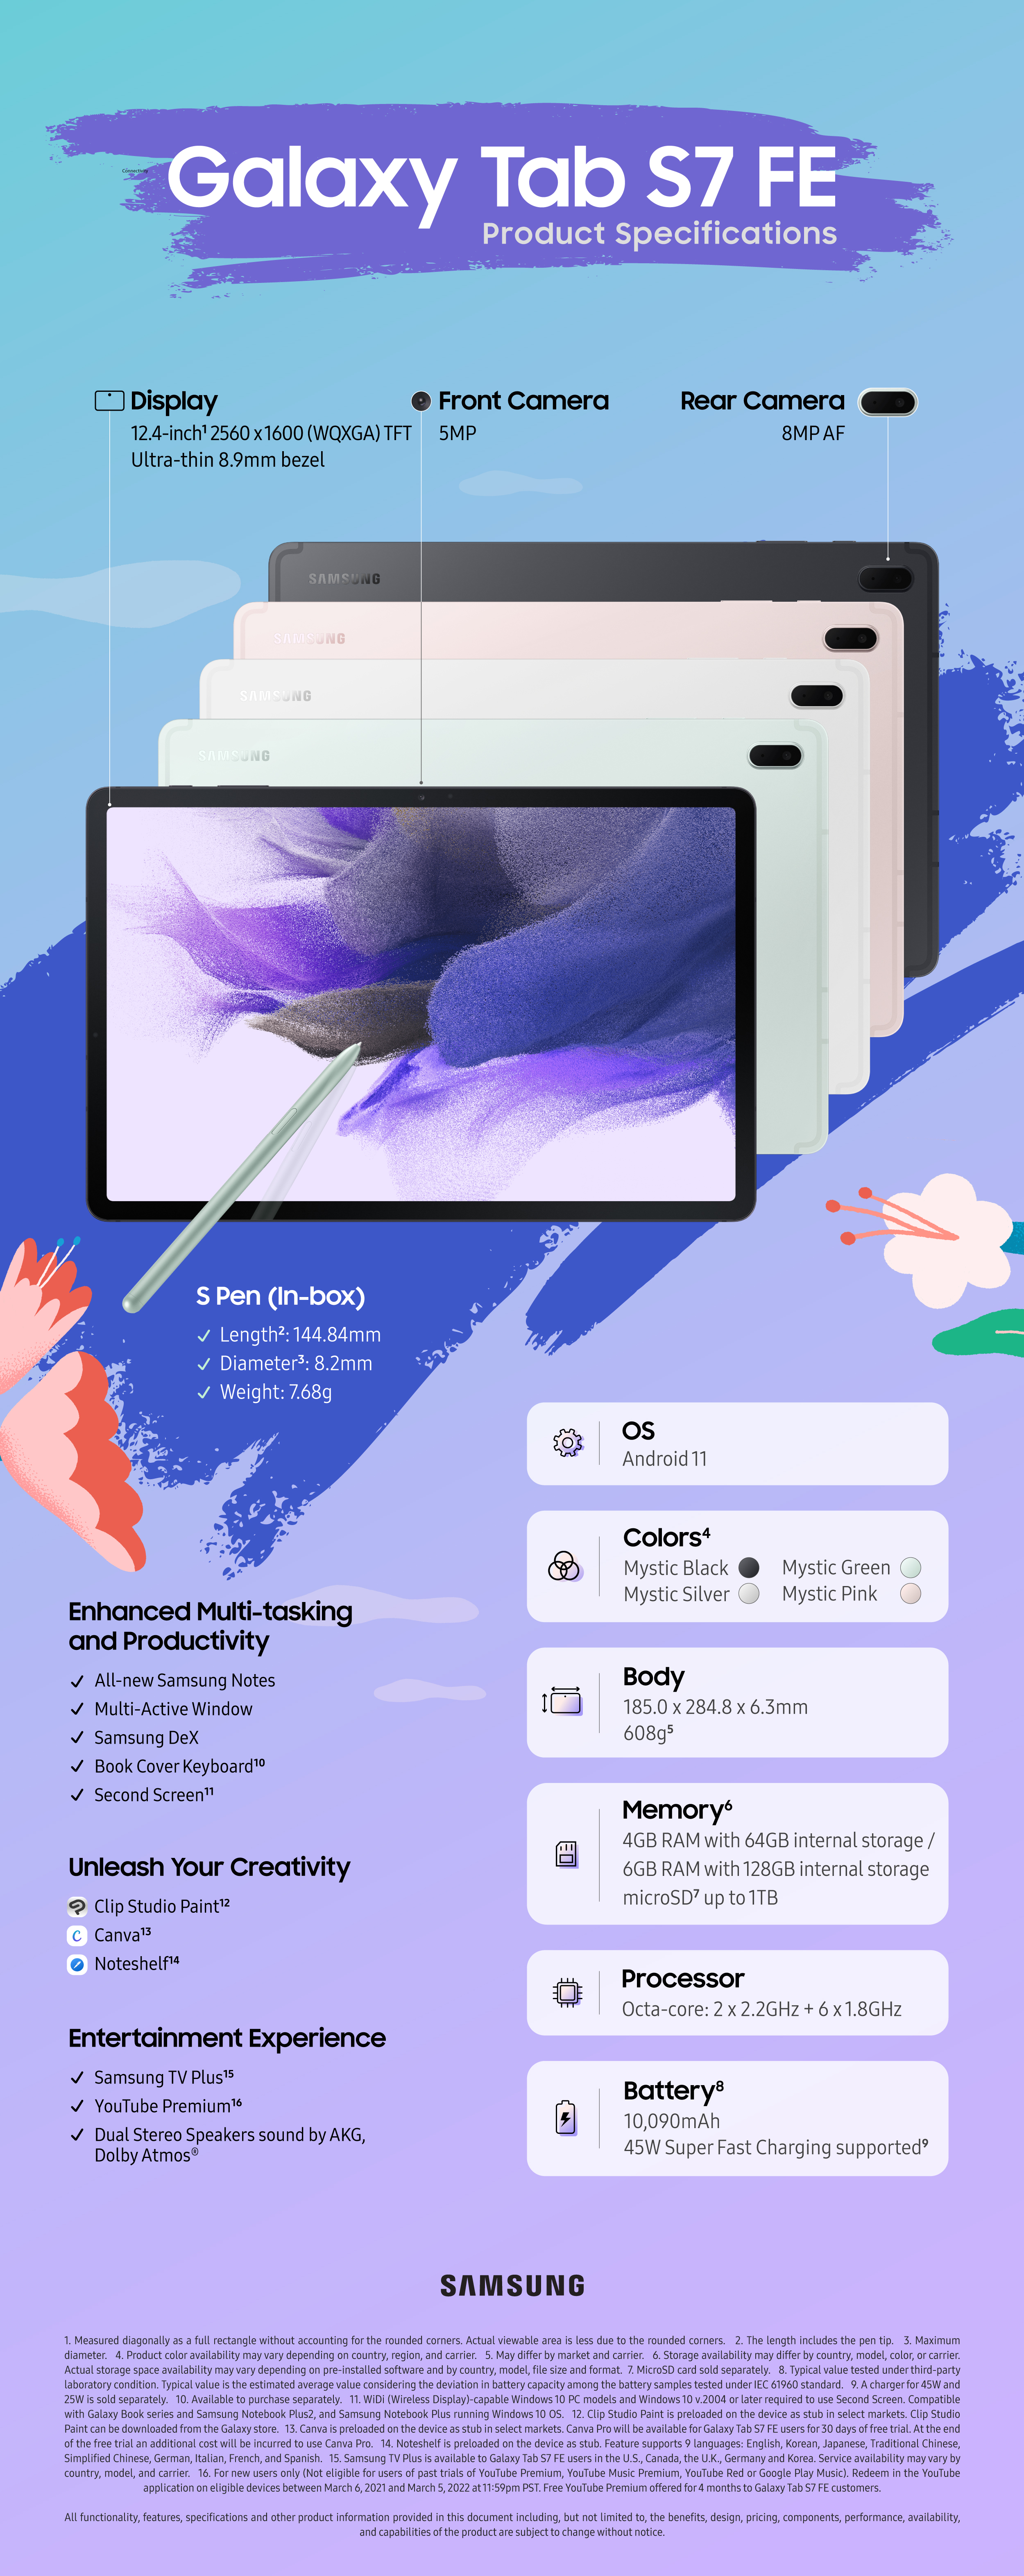 01_galaxy_tab_s7_fe_specification_infographic.jpg